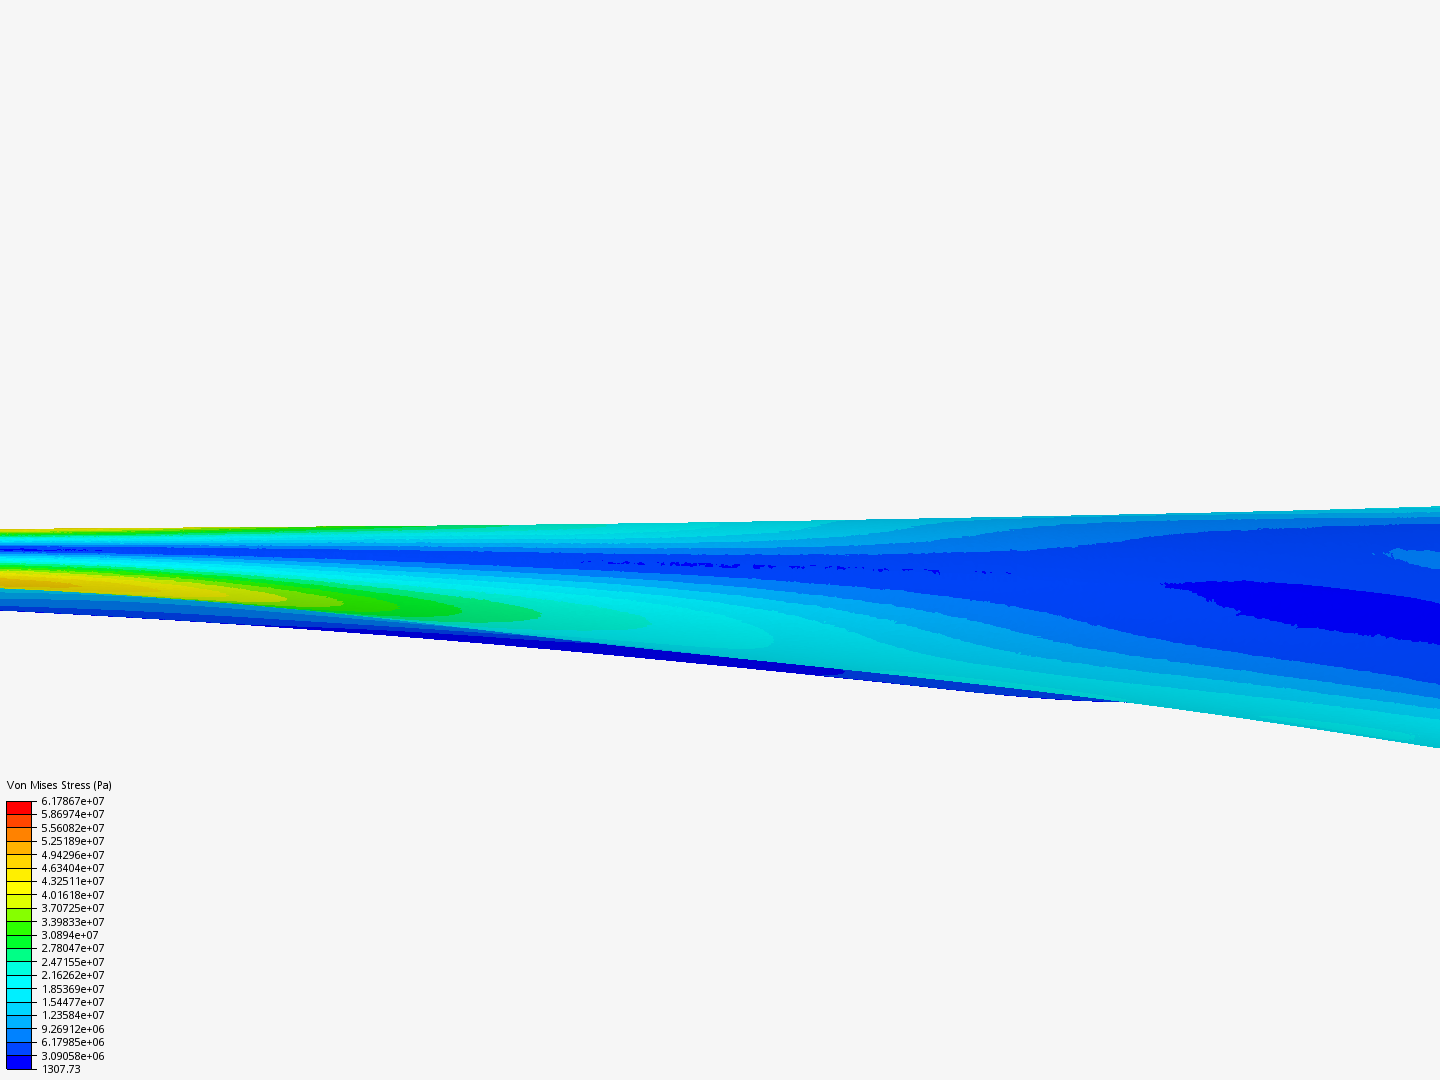 Normal and Extreme loading of turbine blade image